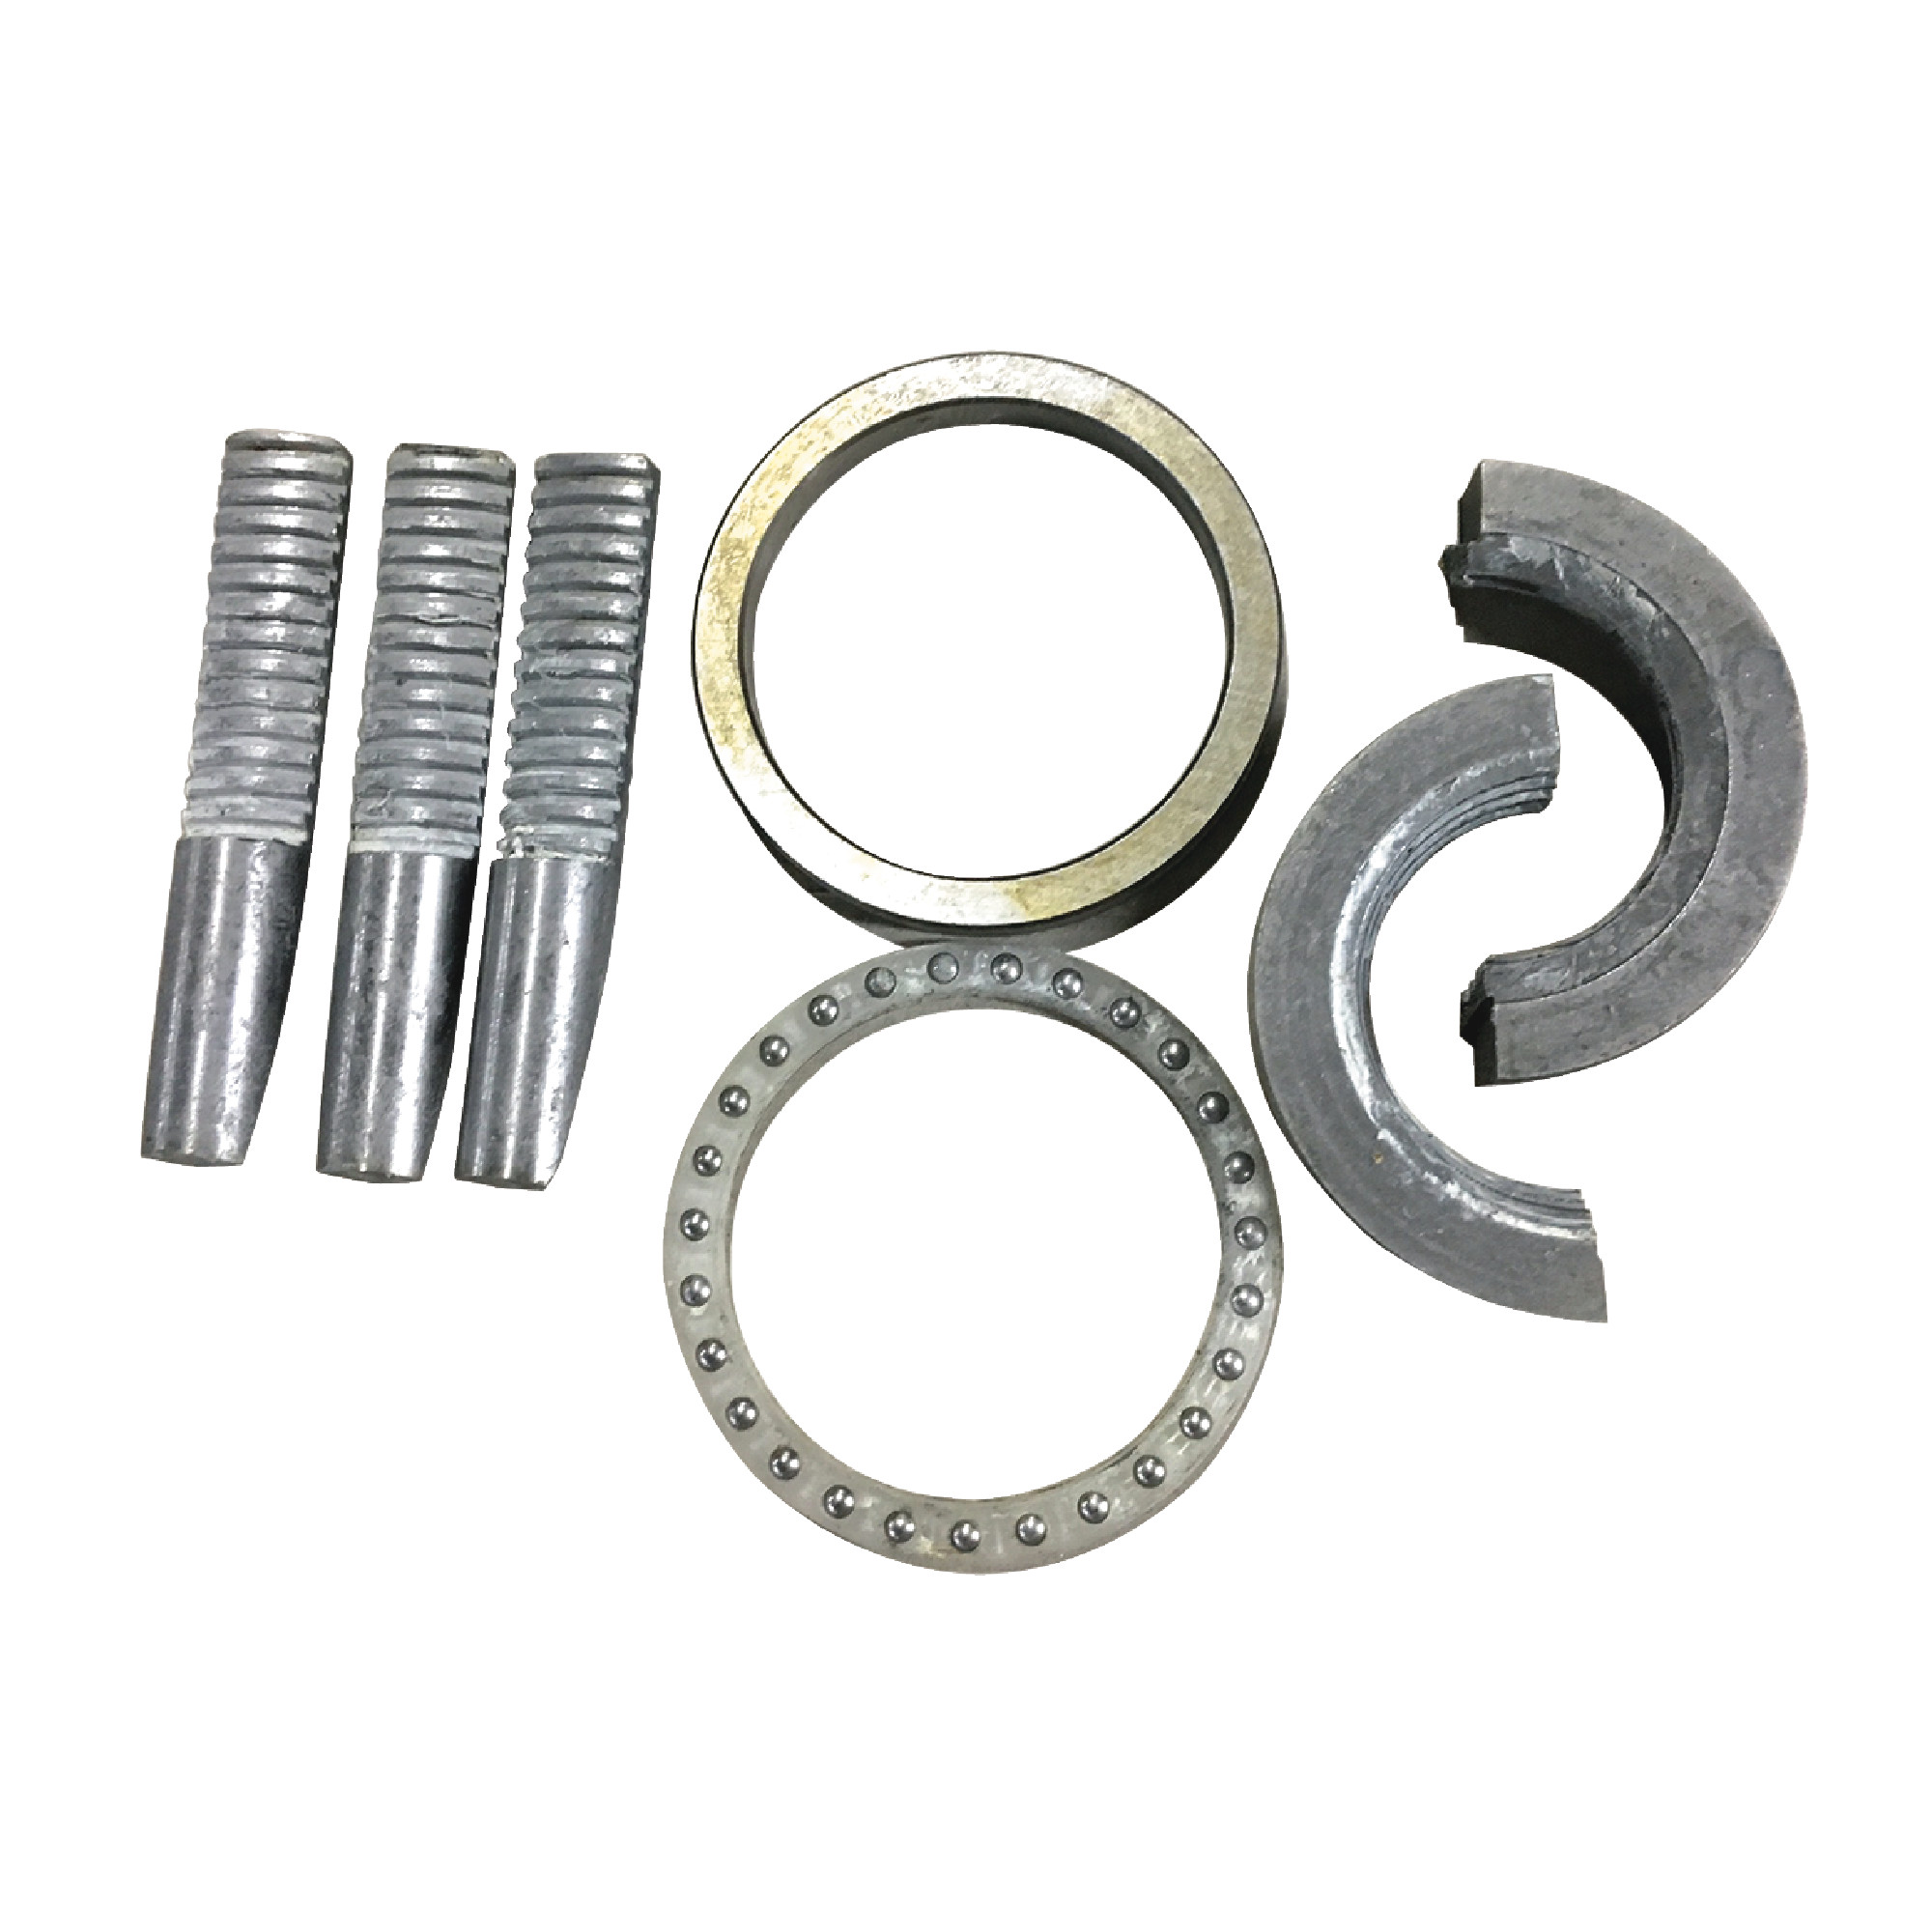 Replacement Jaw and Nut Unit For Ball Bearing Geared Key Super Chuck